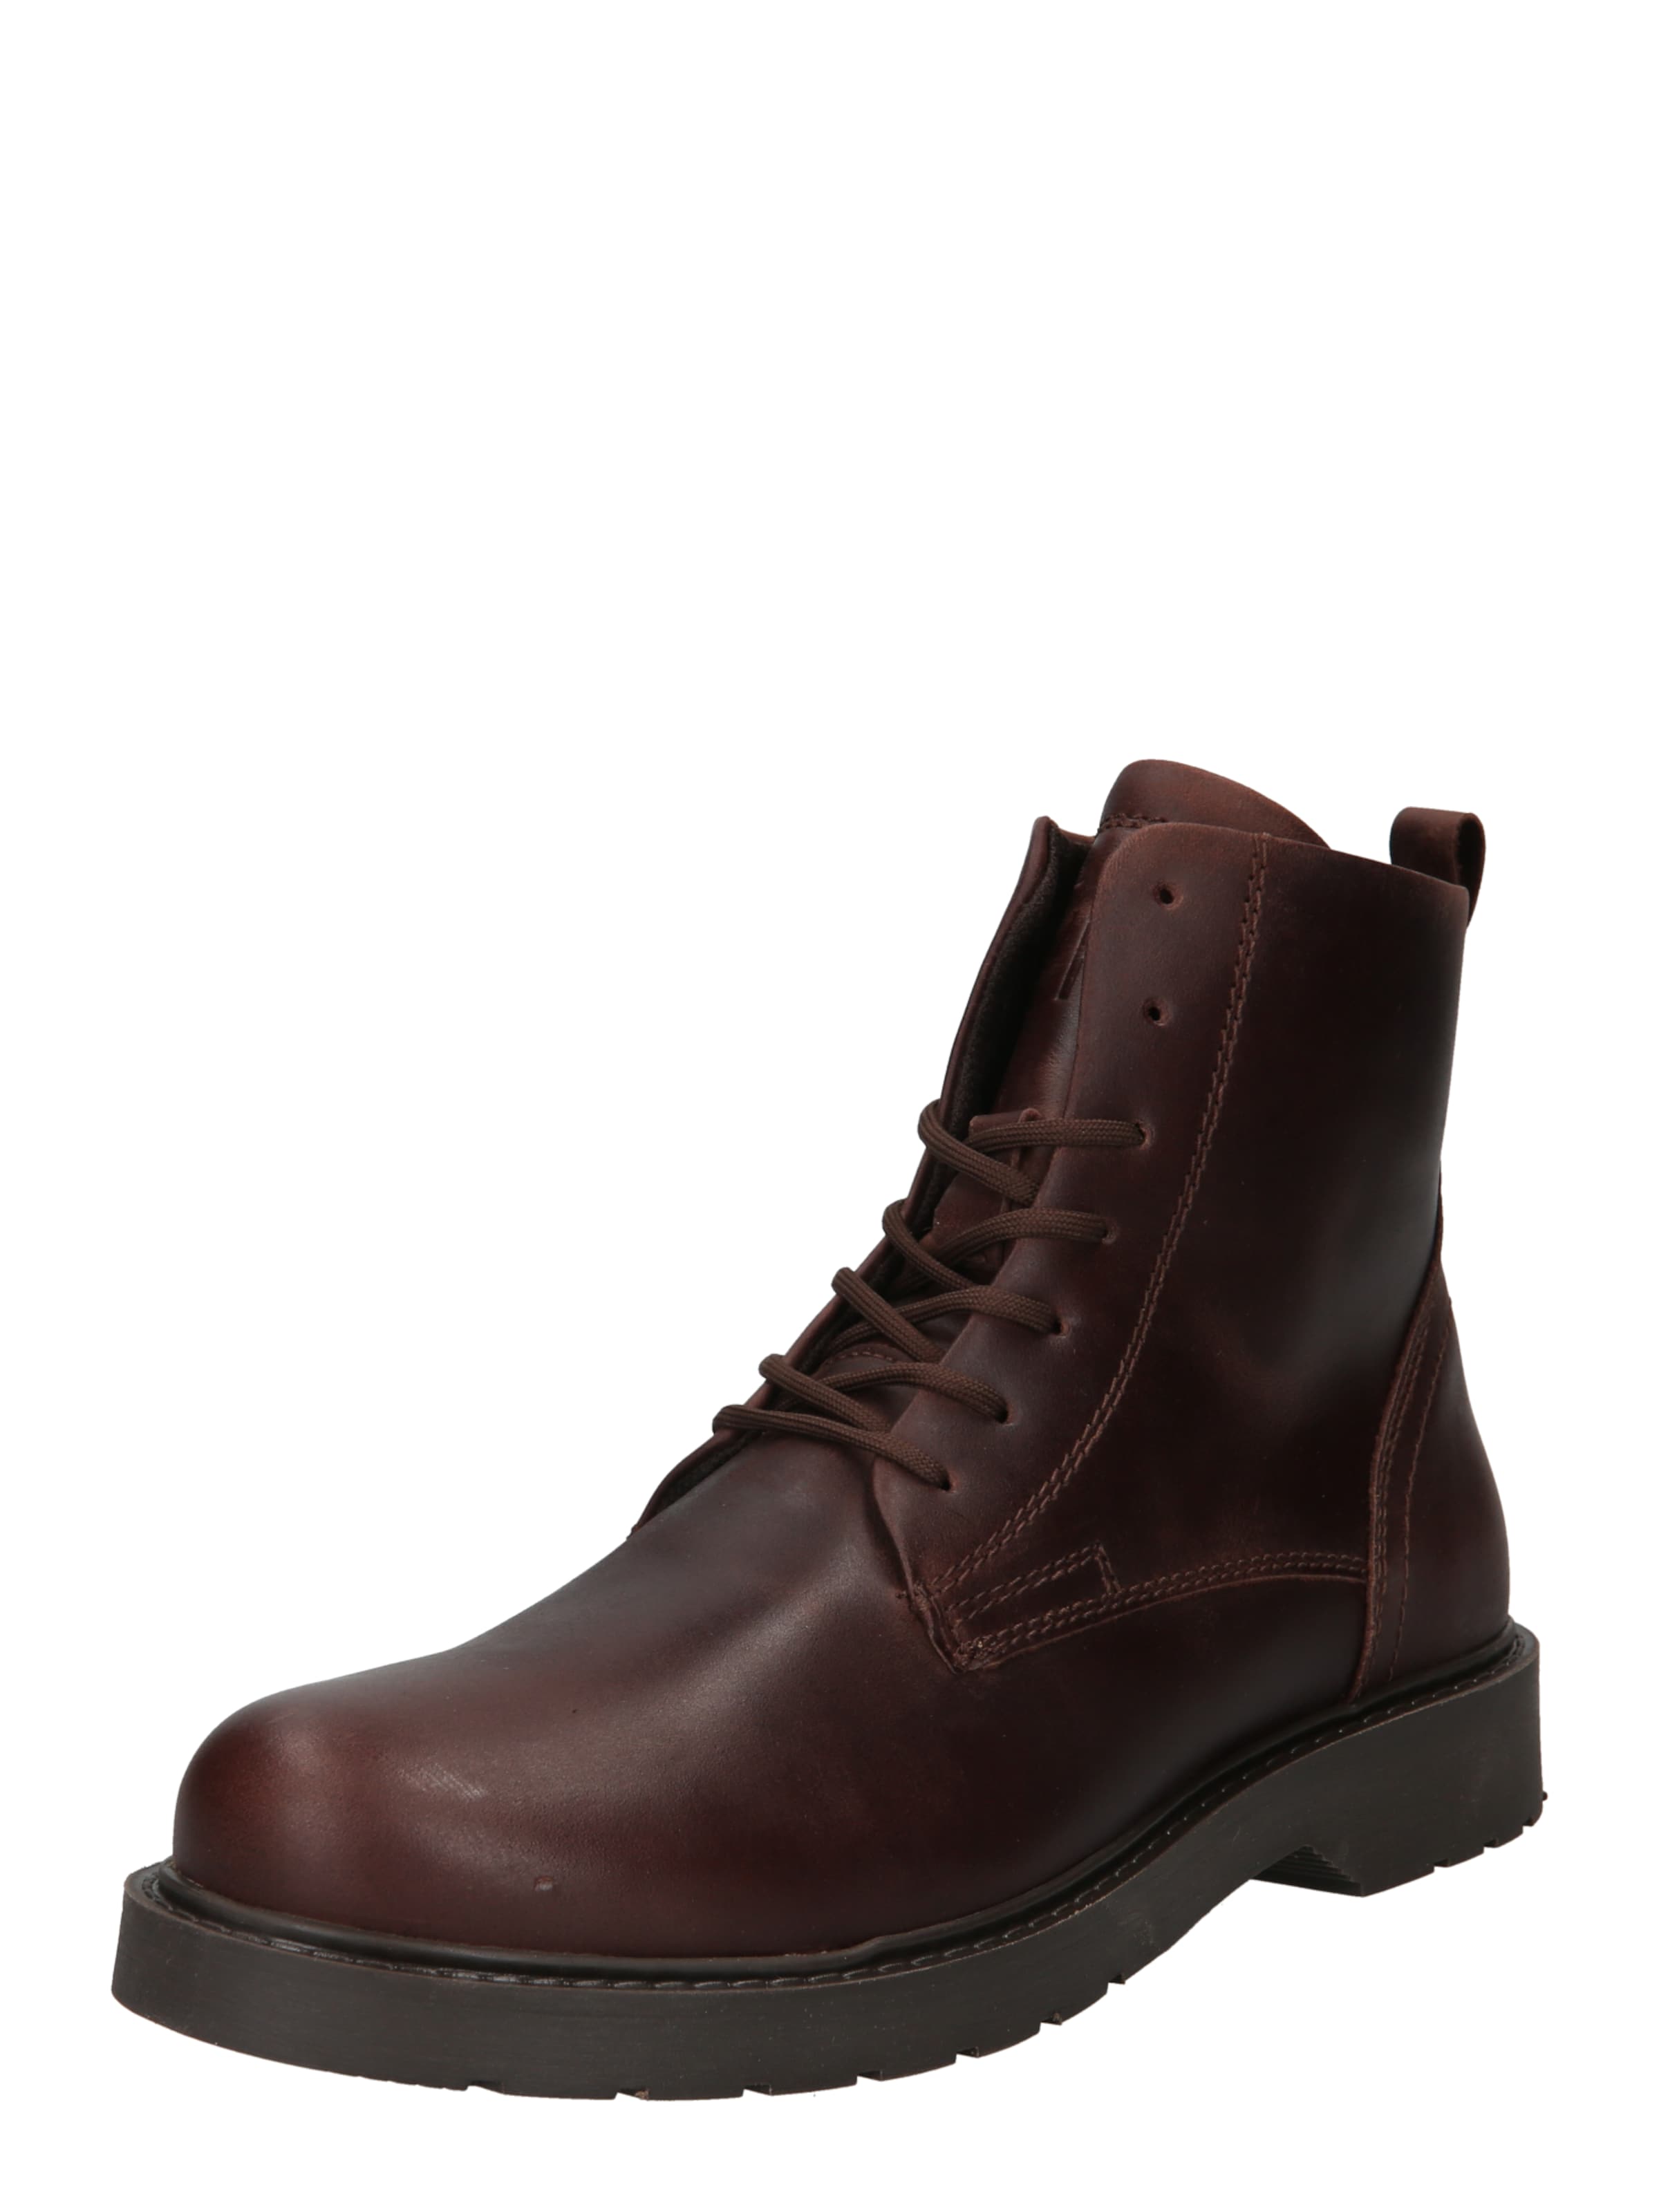 Selected Homme Stiefel 'thomas' 43 Braun